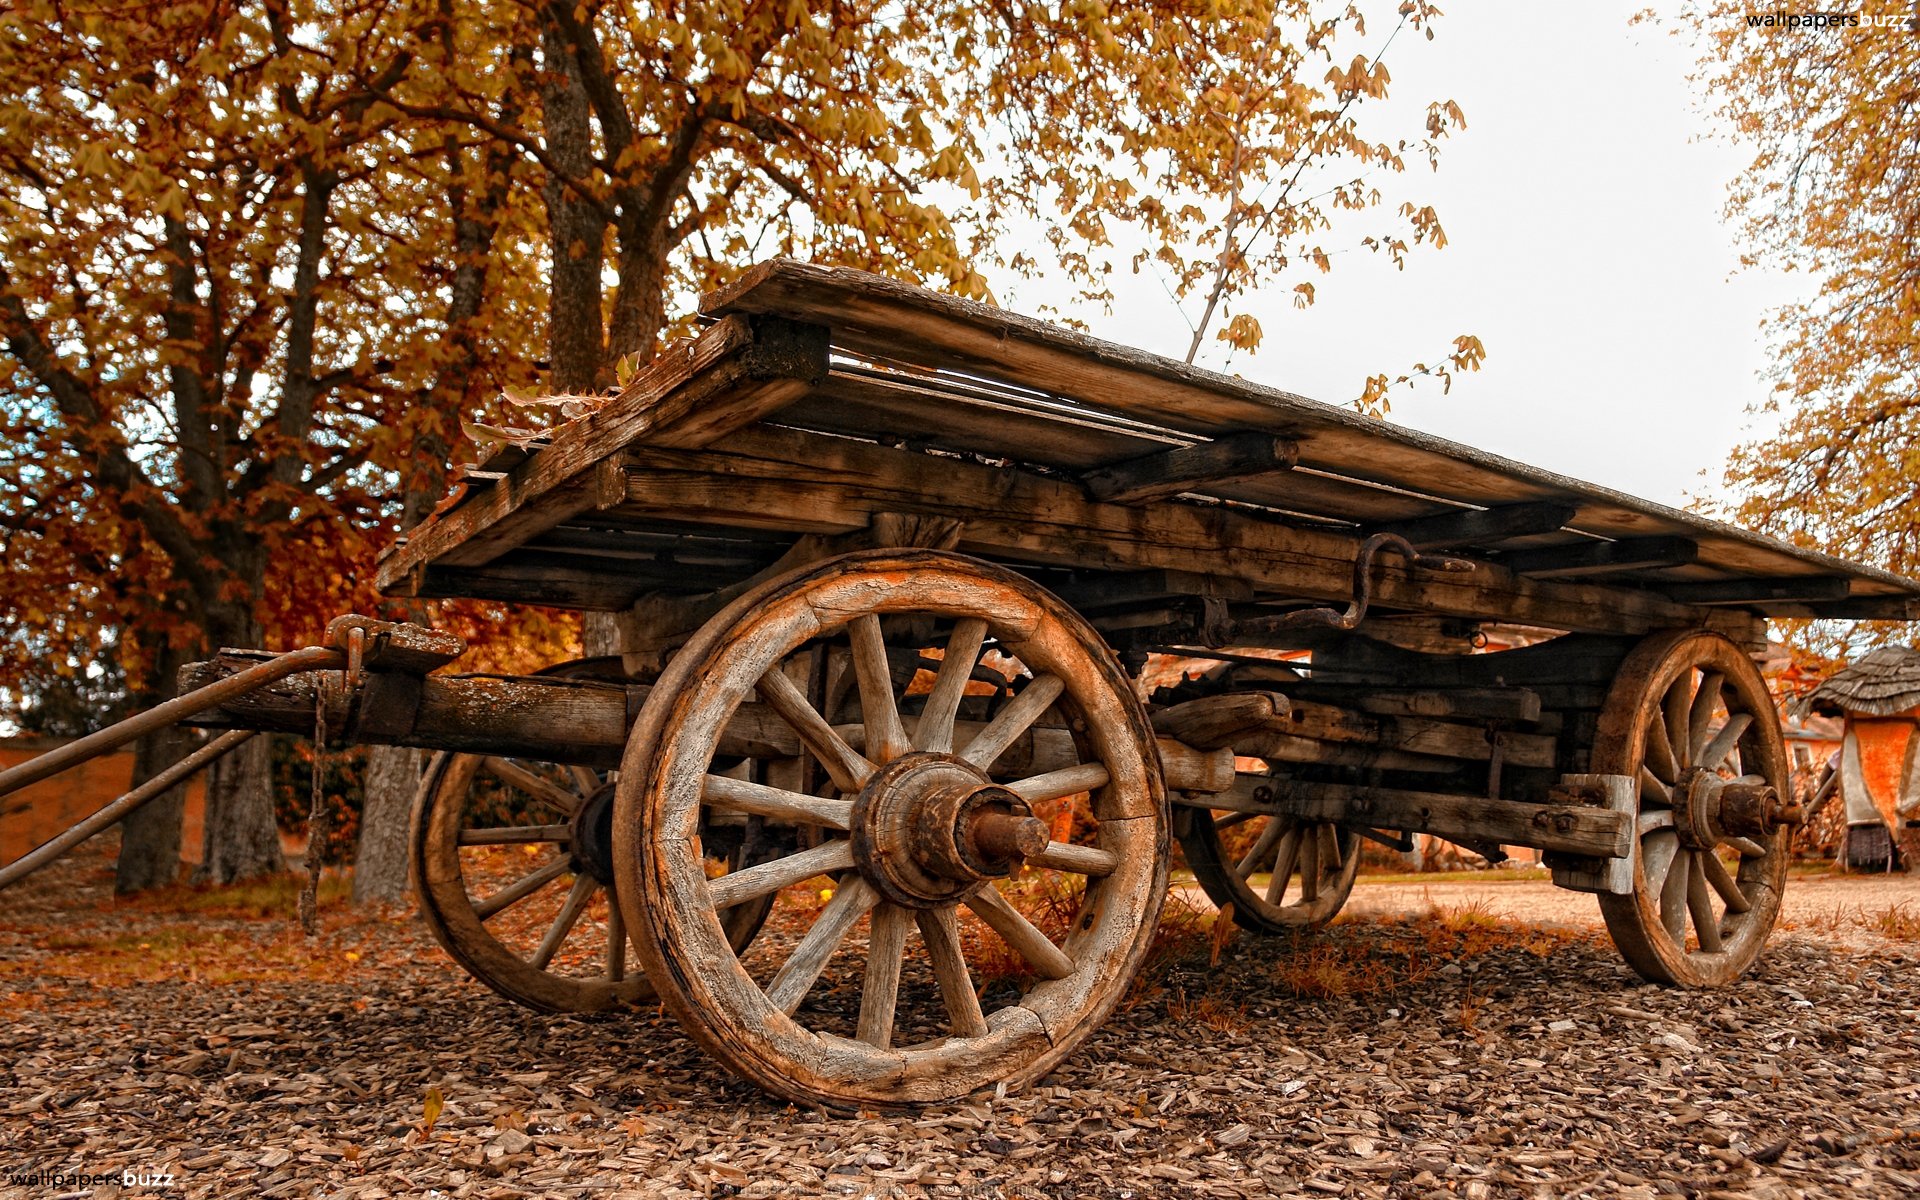 An old carriage HD Wallpaper